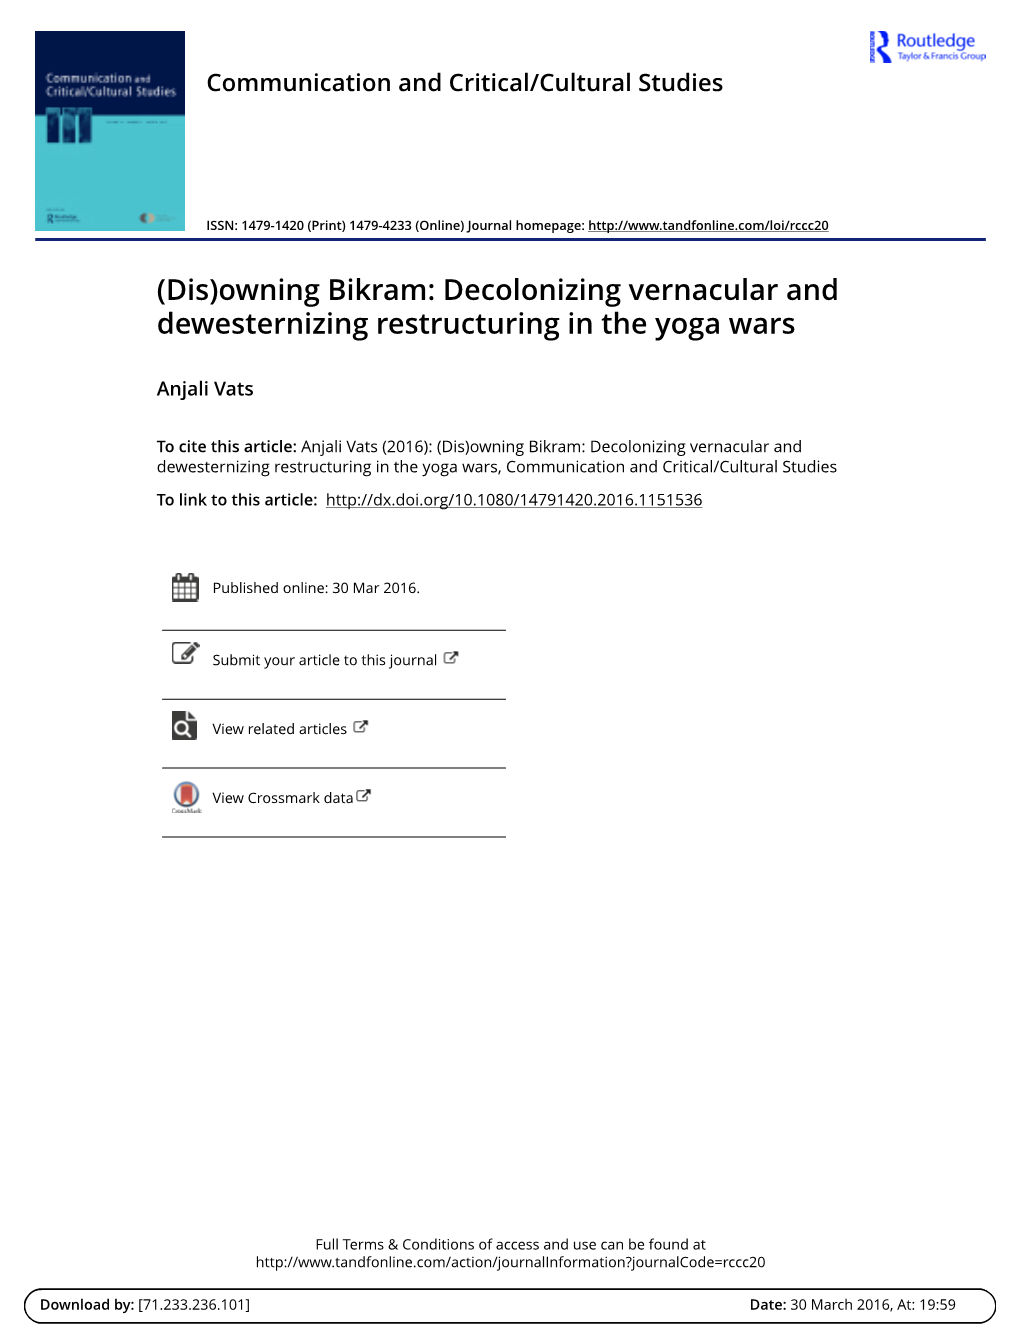 (Dis)Owning Bikram: Decolonizing Vernacular and Dewesternizing Restructuring in the Yoga Wars